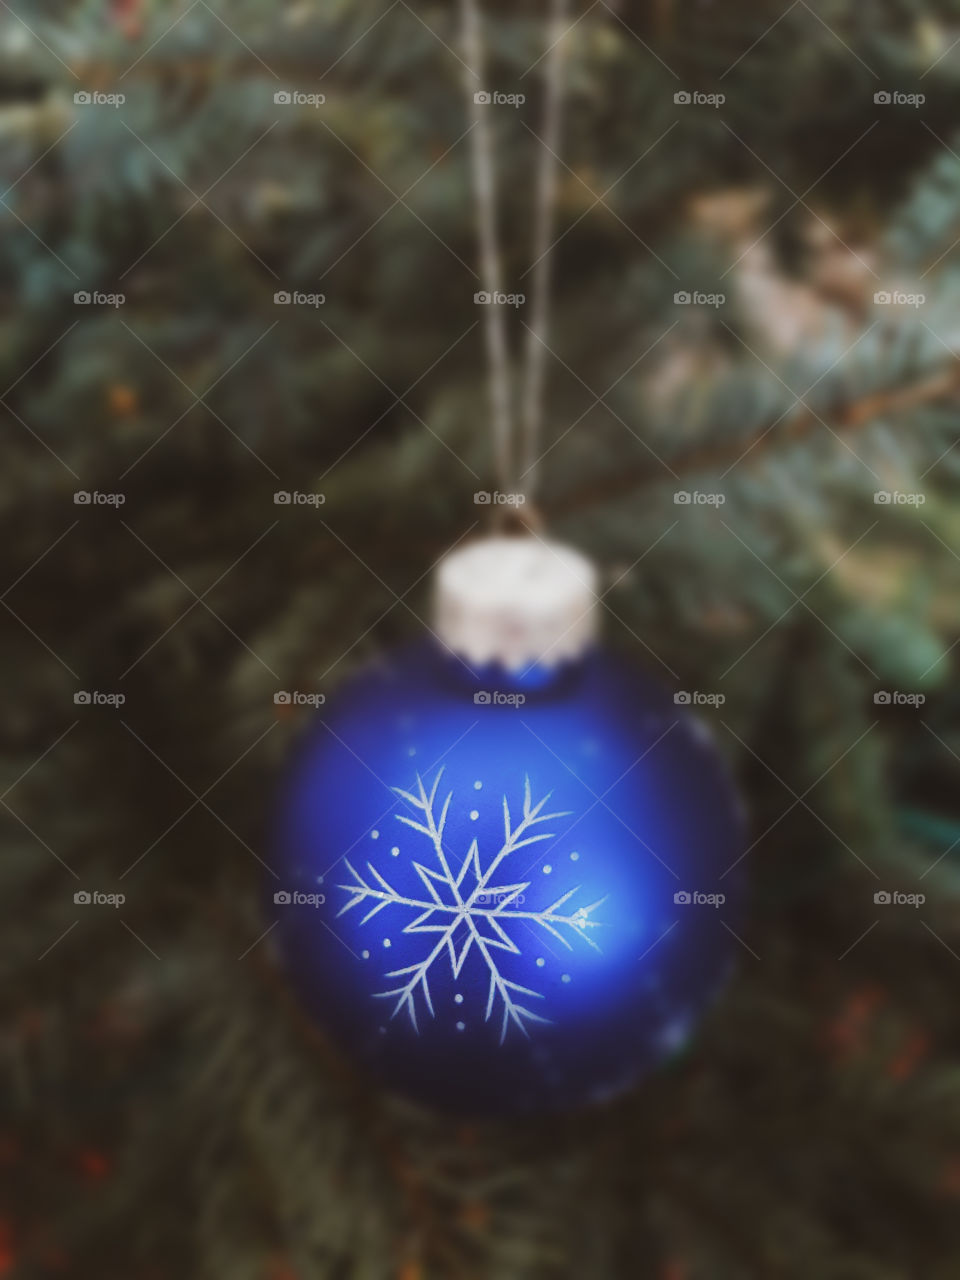 Blue ornament hanging on the Christmas tree.